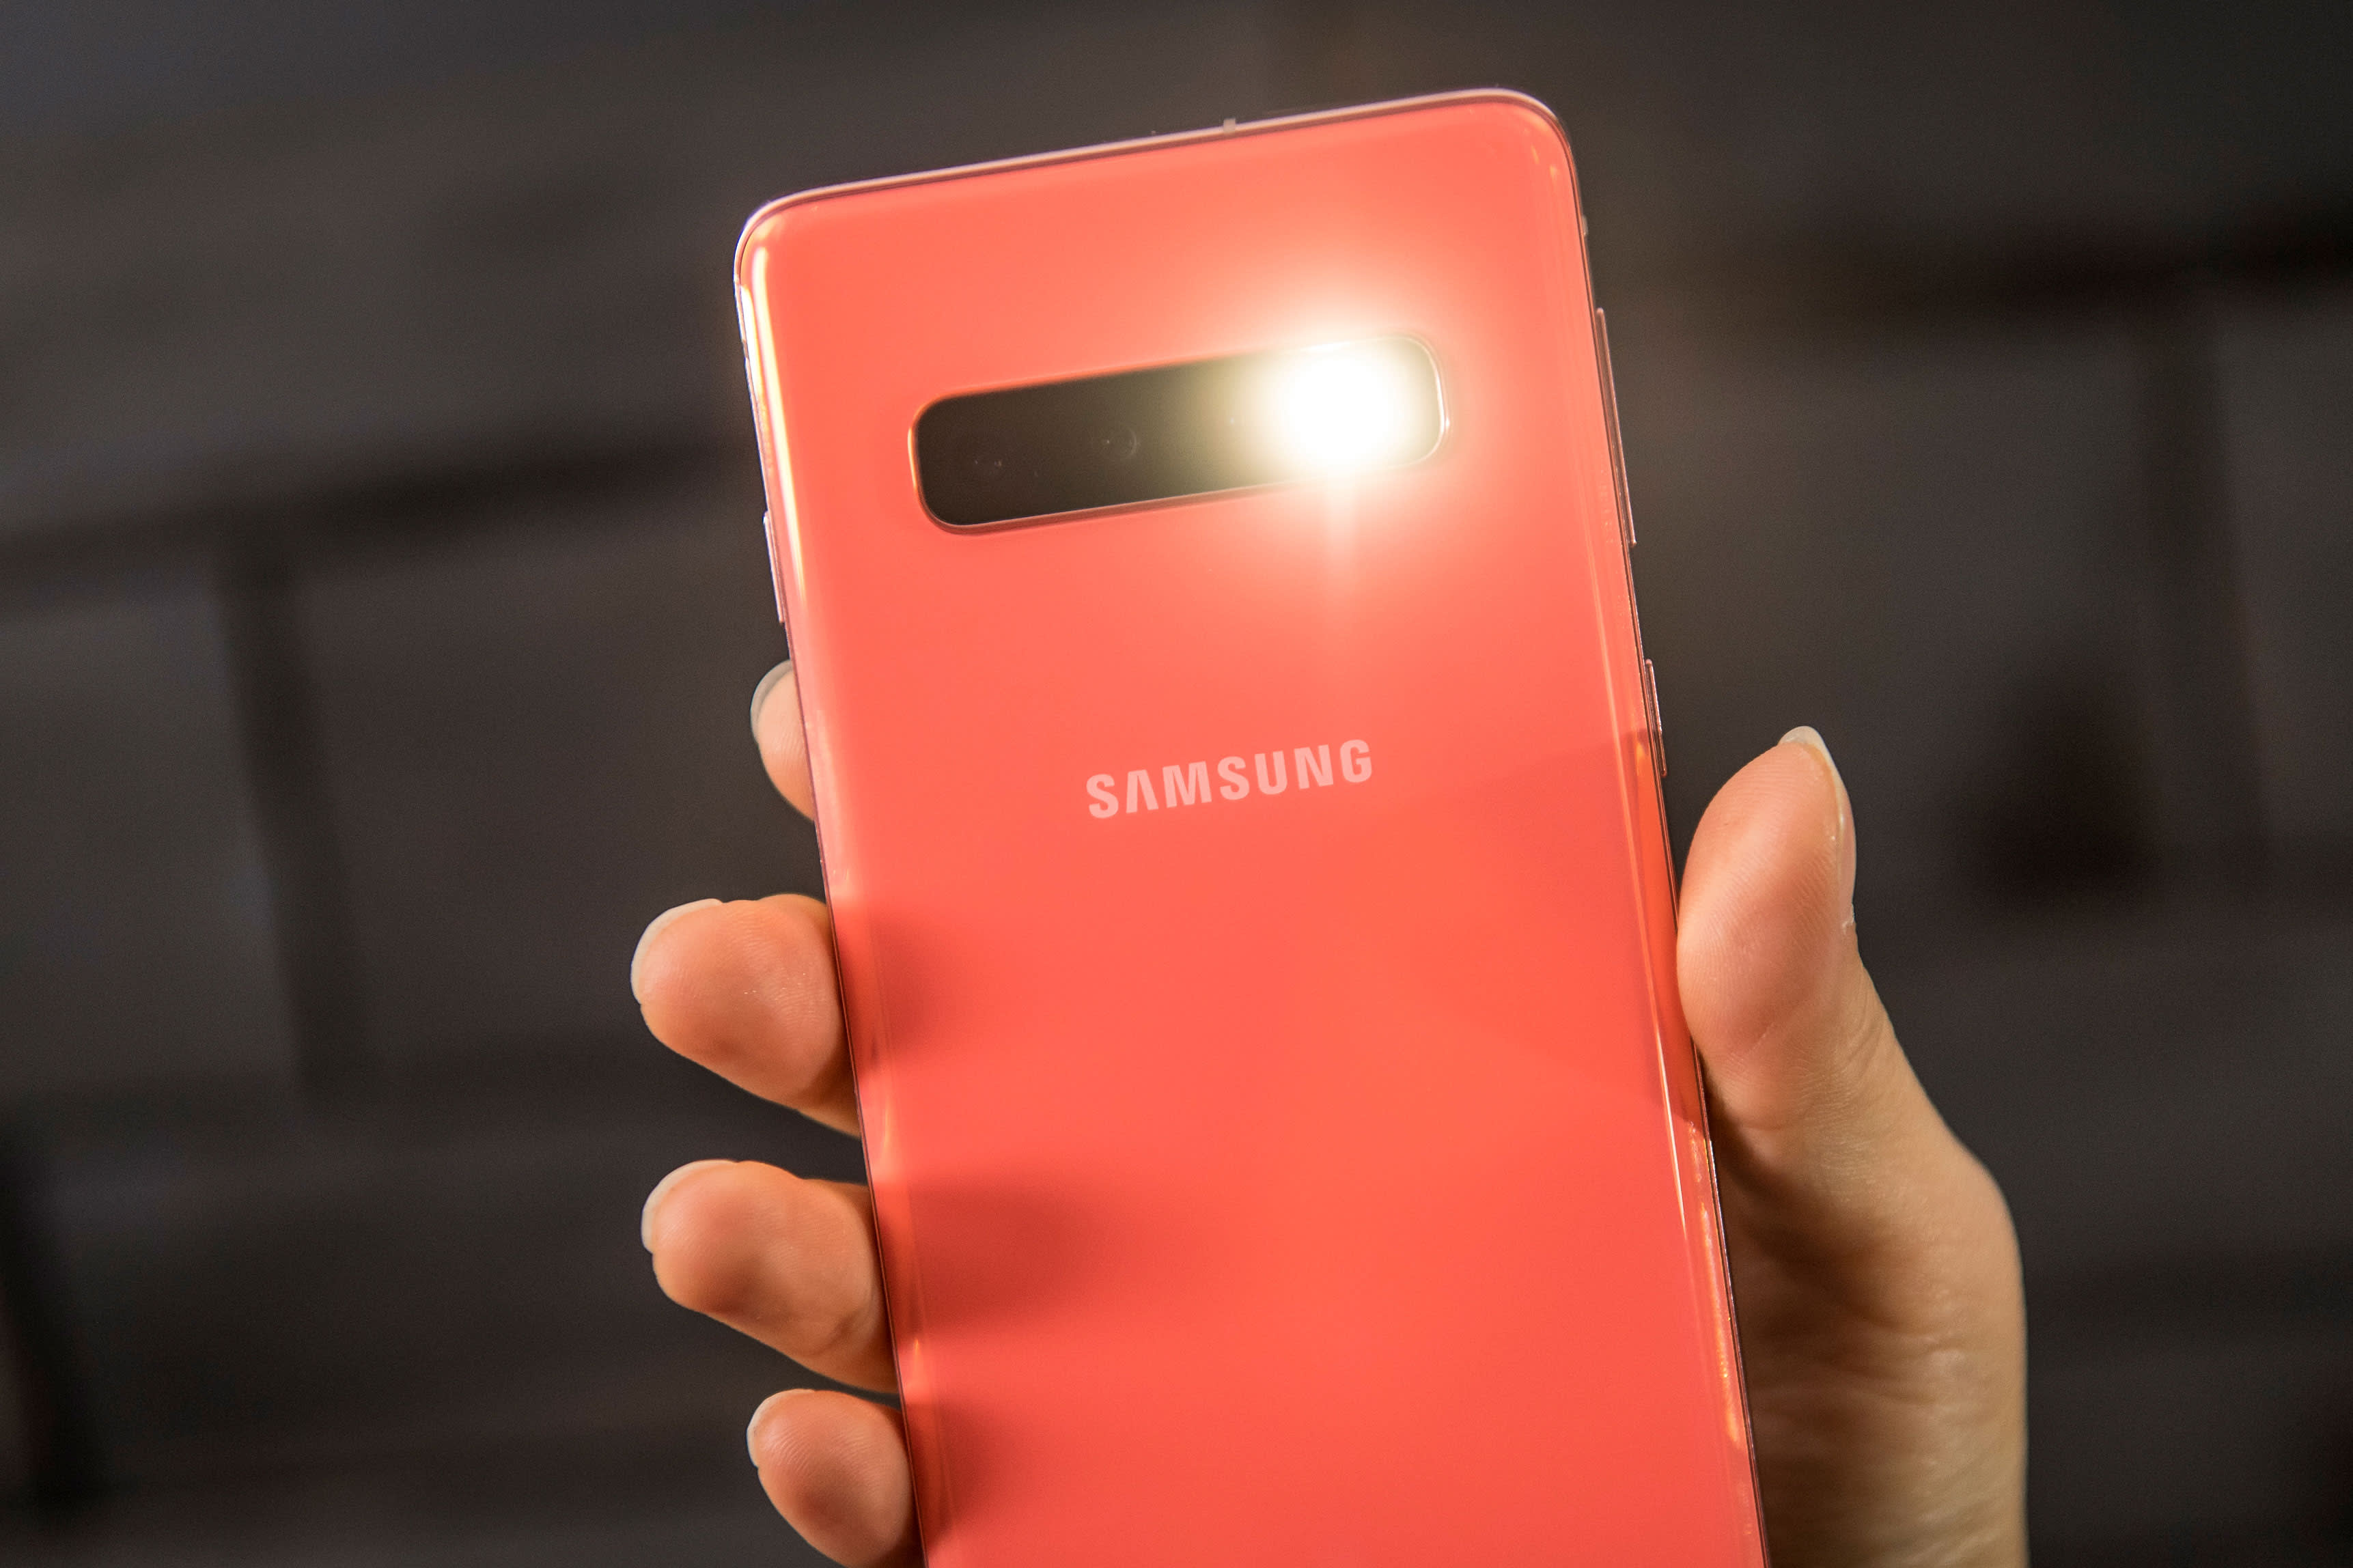 Samsung Galaxy S10 announced: price, hands-on, and release date